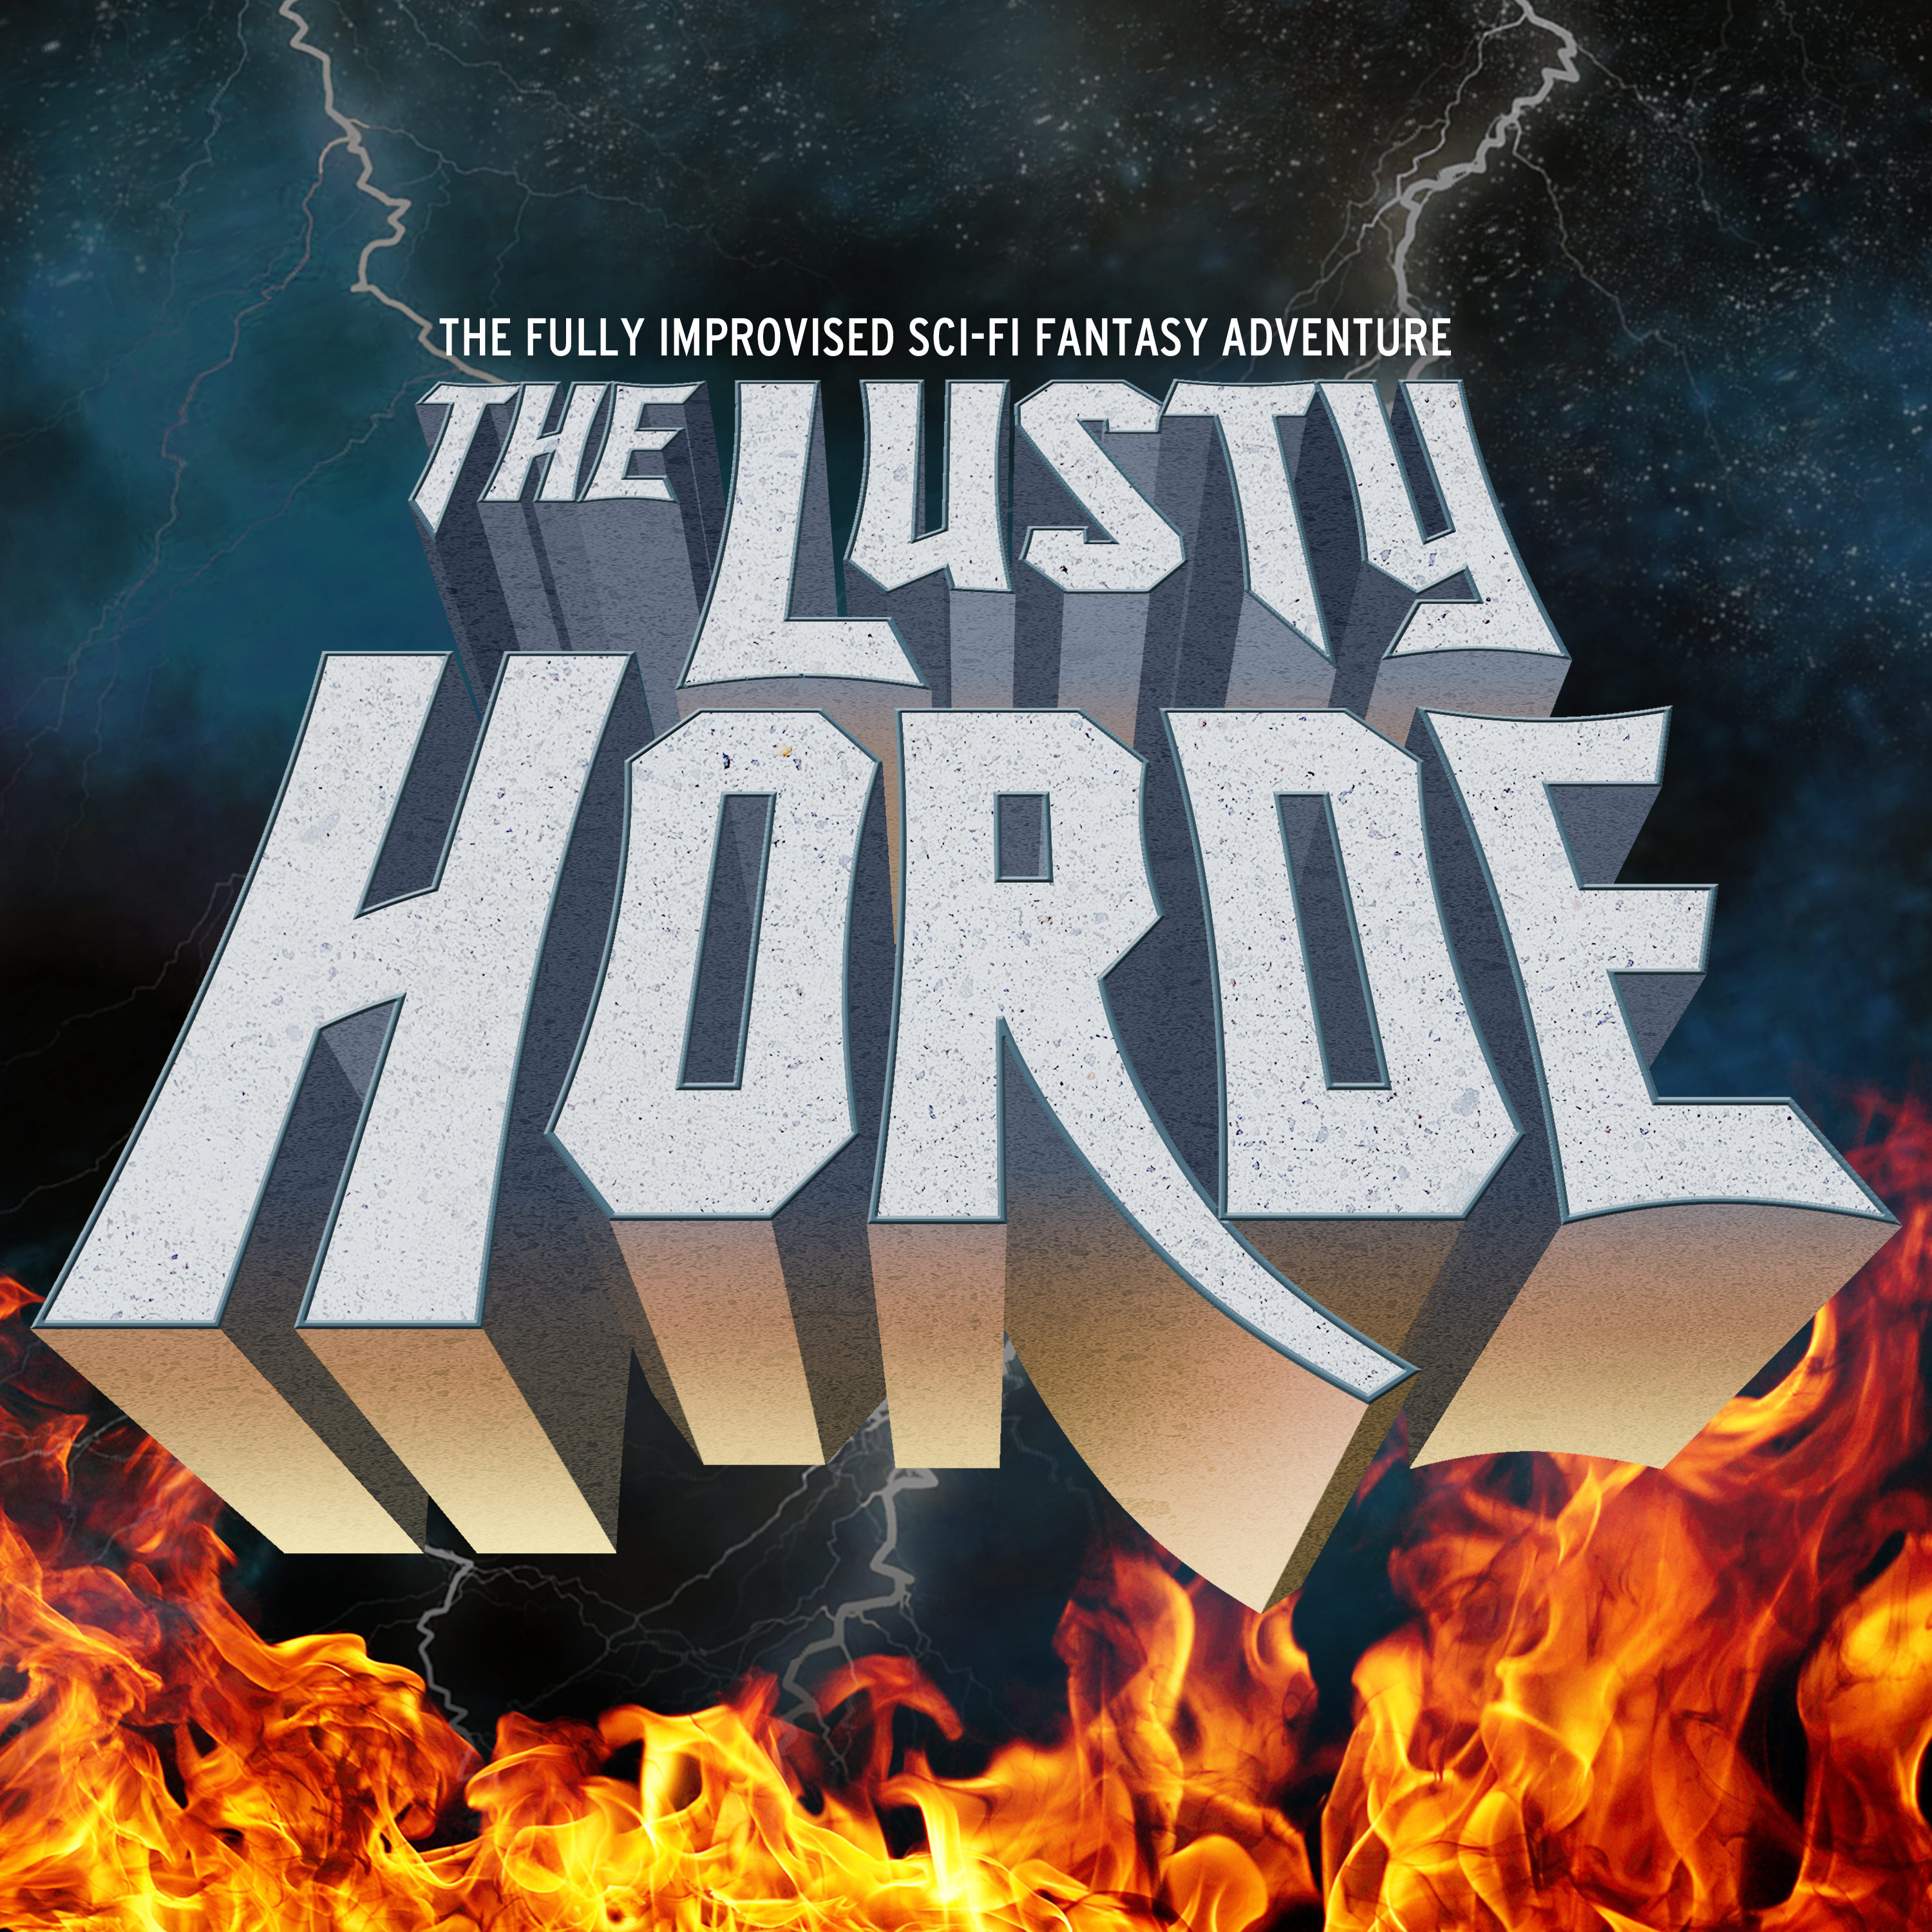 The Lusty Horde